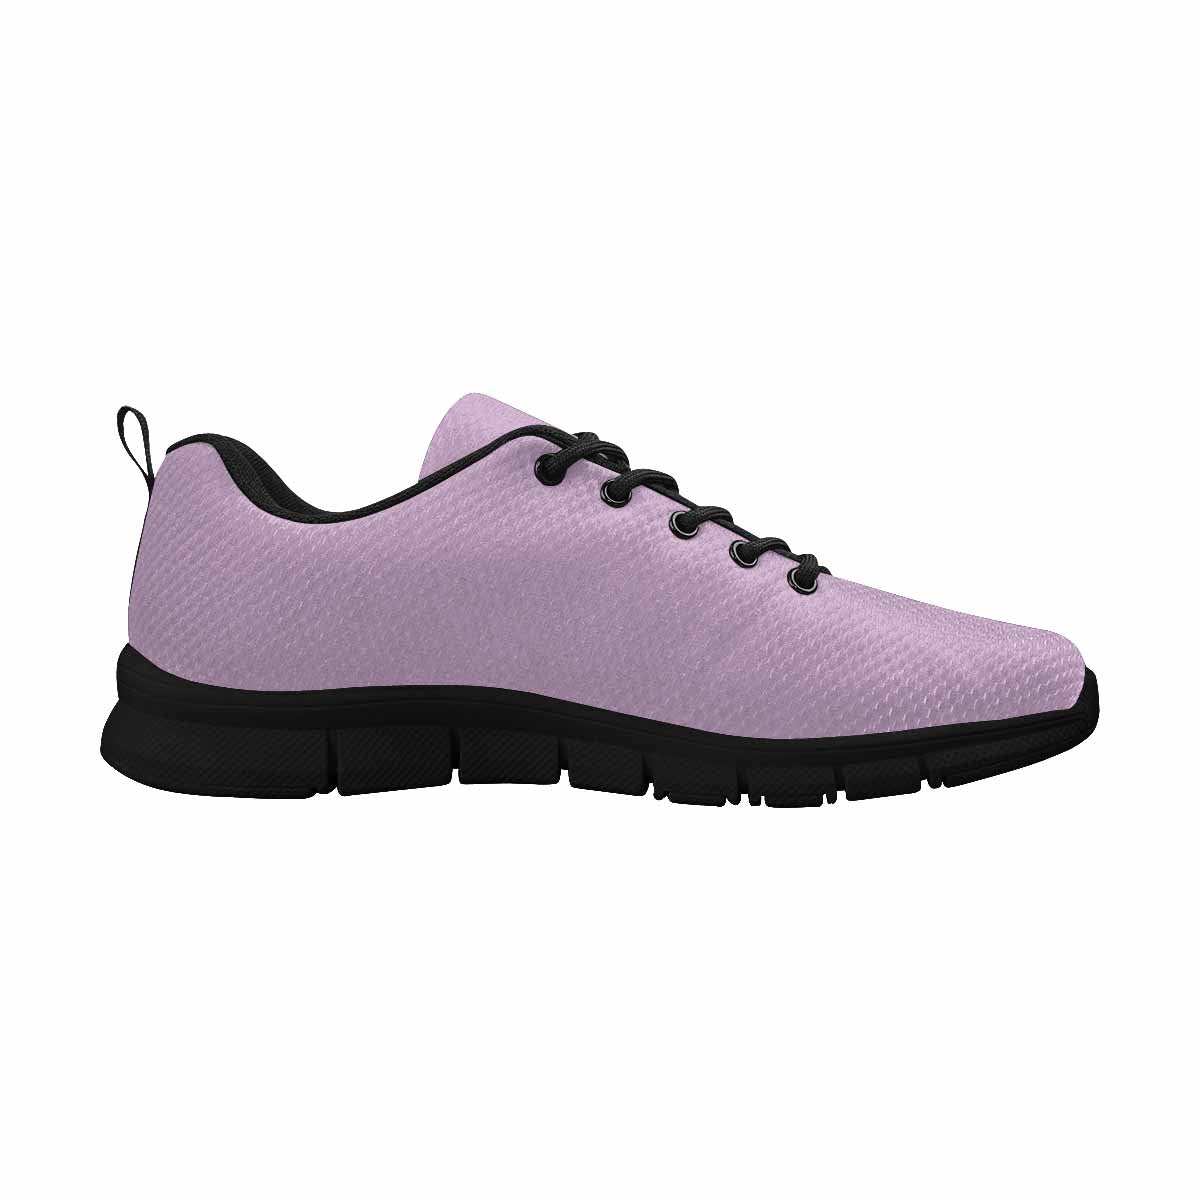 Sneakers For Men, Lilac Purple Running Shoes